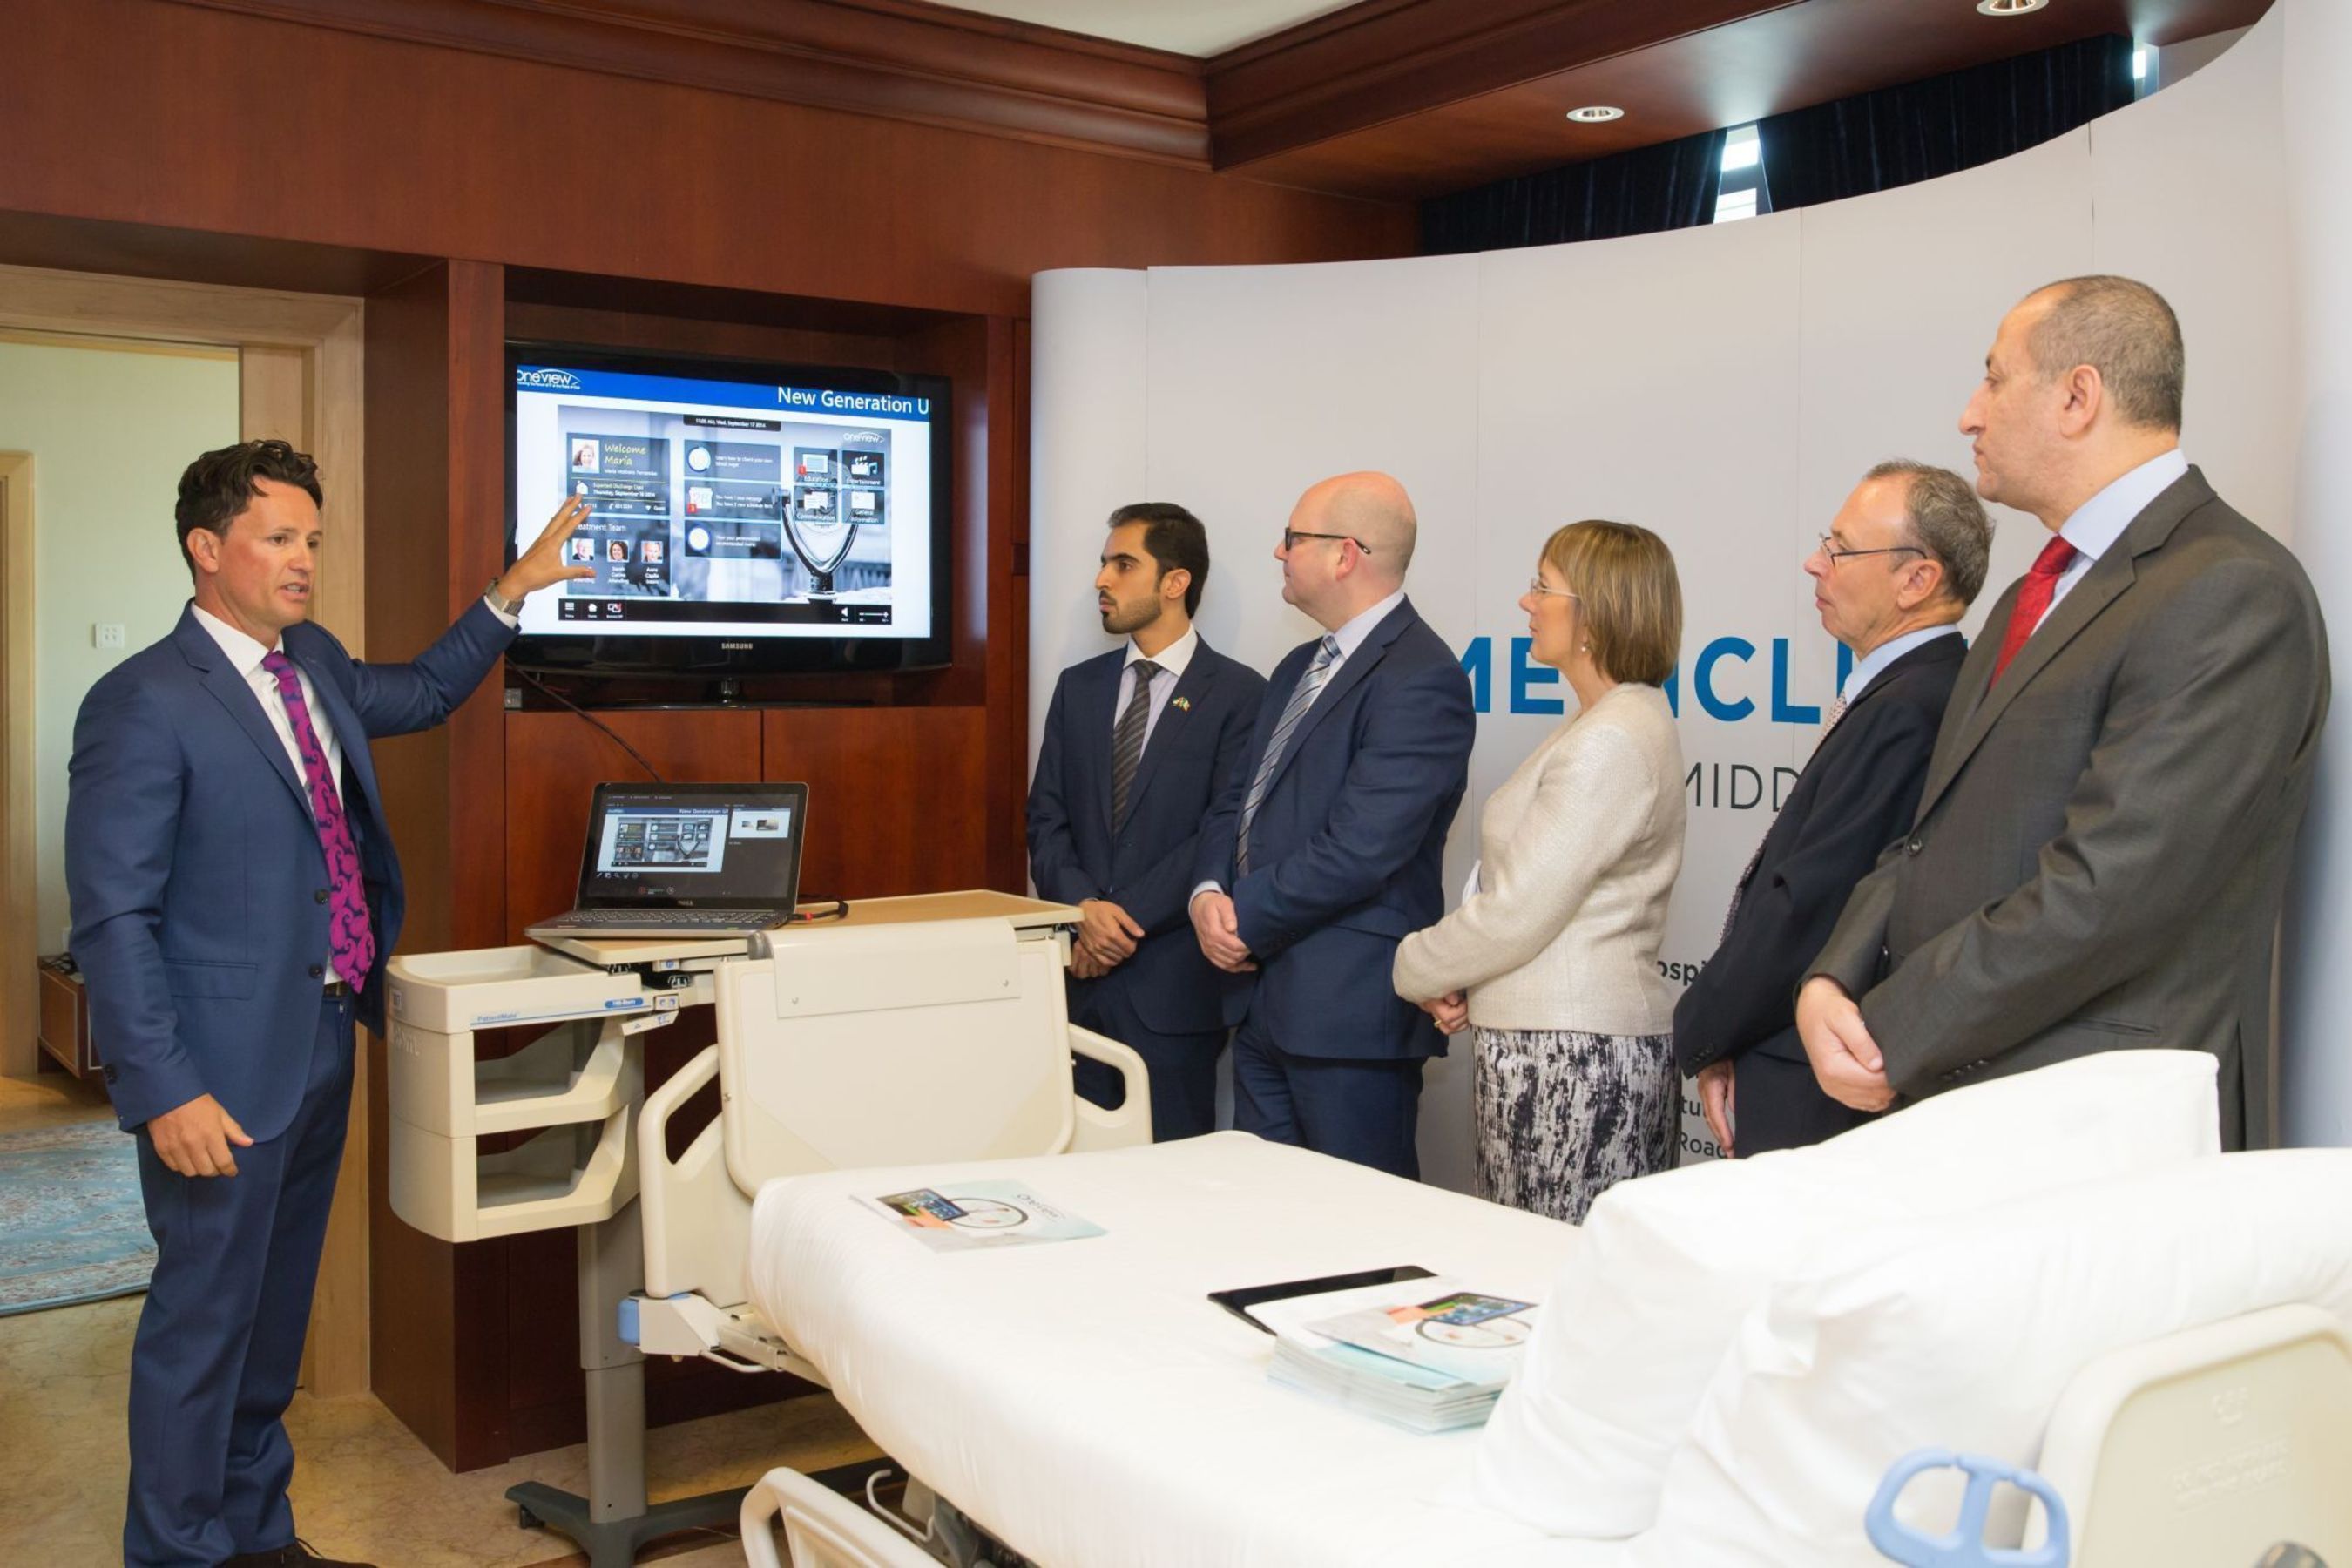 Oneviewâeuro(TM)s Patient Engagement and Clinical Workflow Solution is being deployed at Mediclinic City Hospital and Mediclinic Welcare Hospital (PRNewsFoto/Oneview Healthcare)